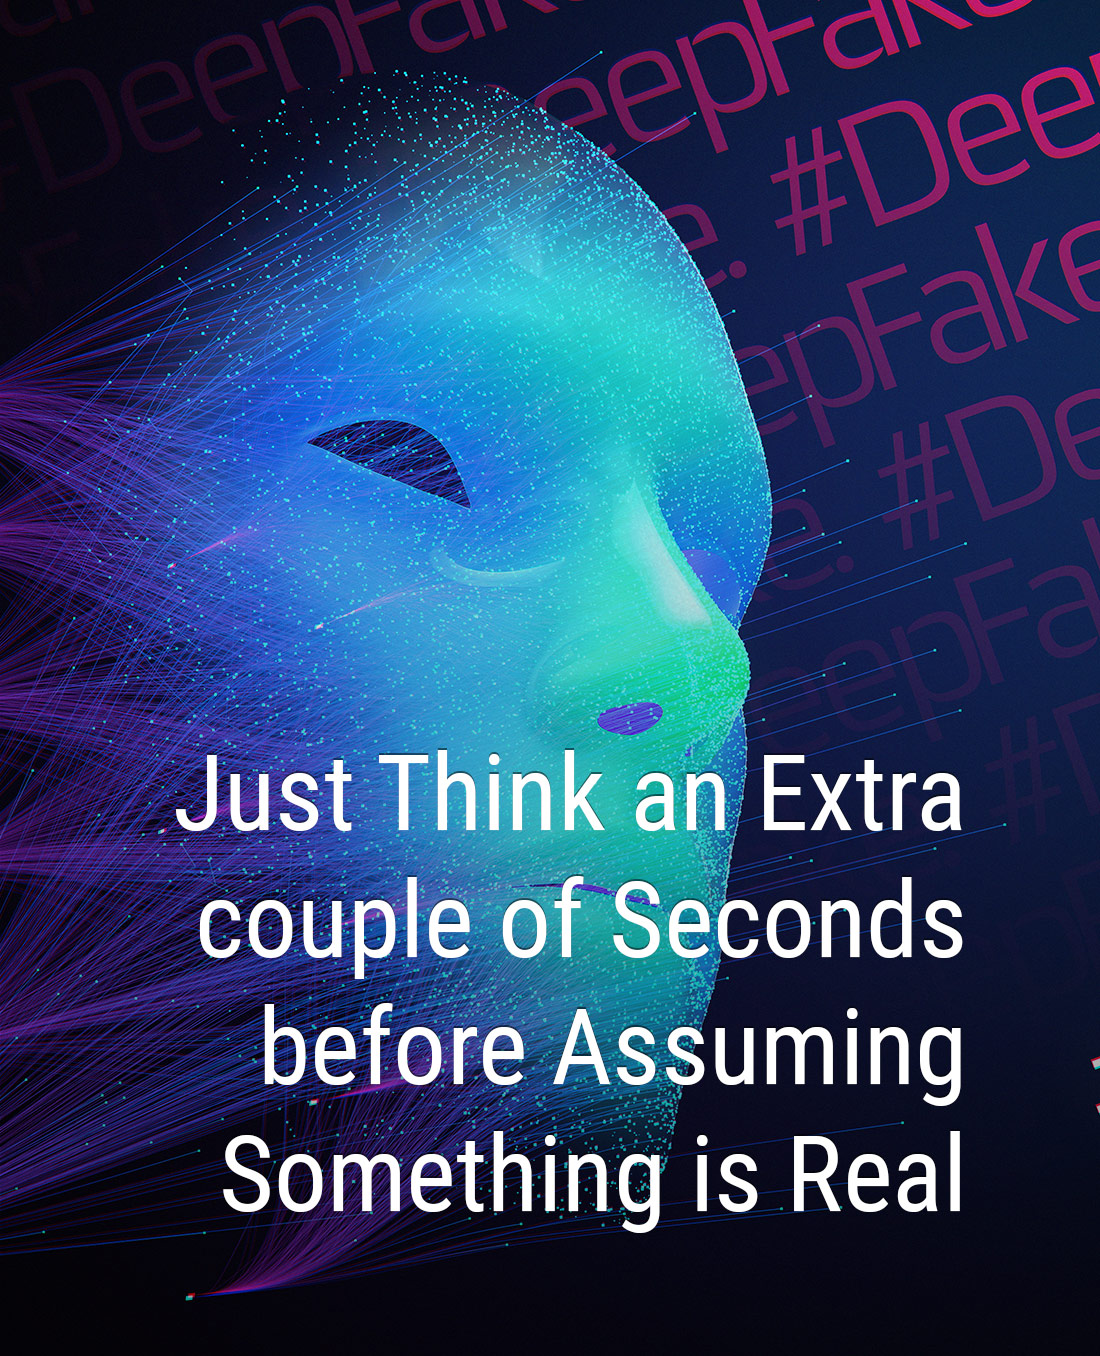 Just think an extra couple of seconds before assuming something is real.